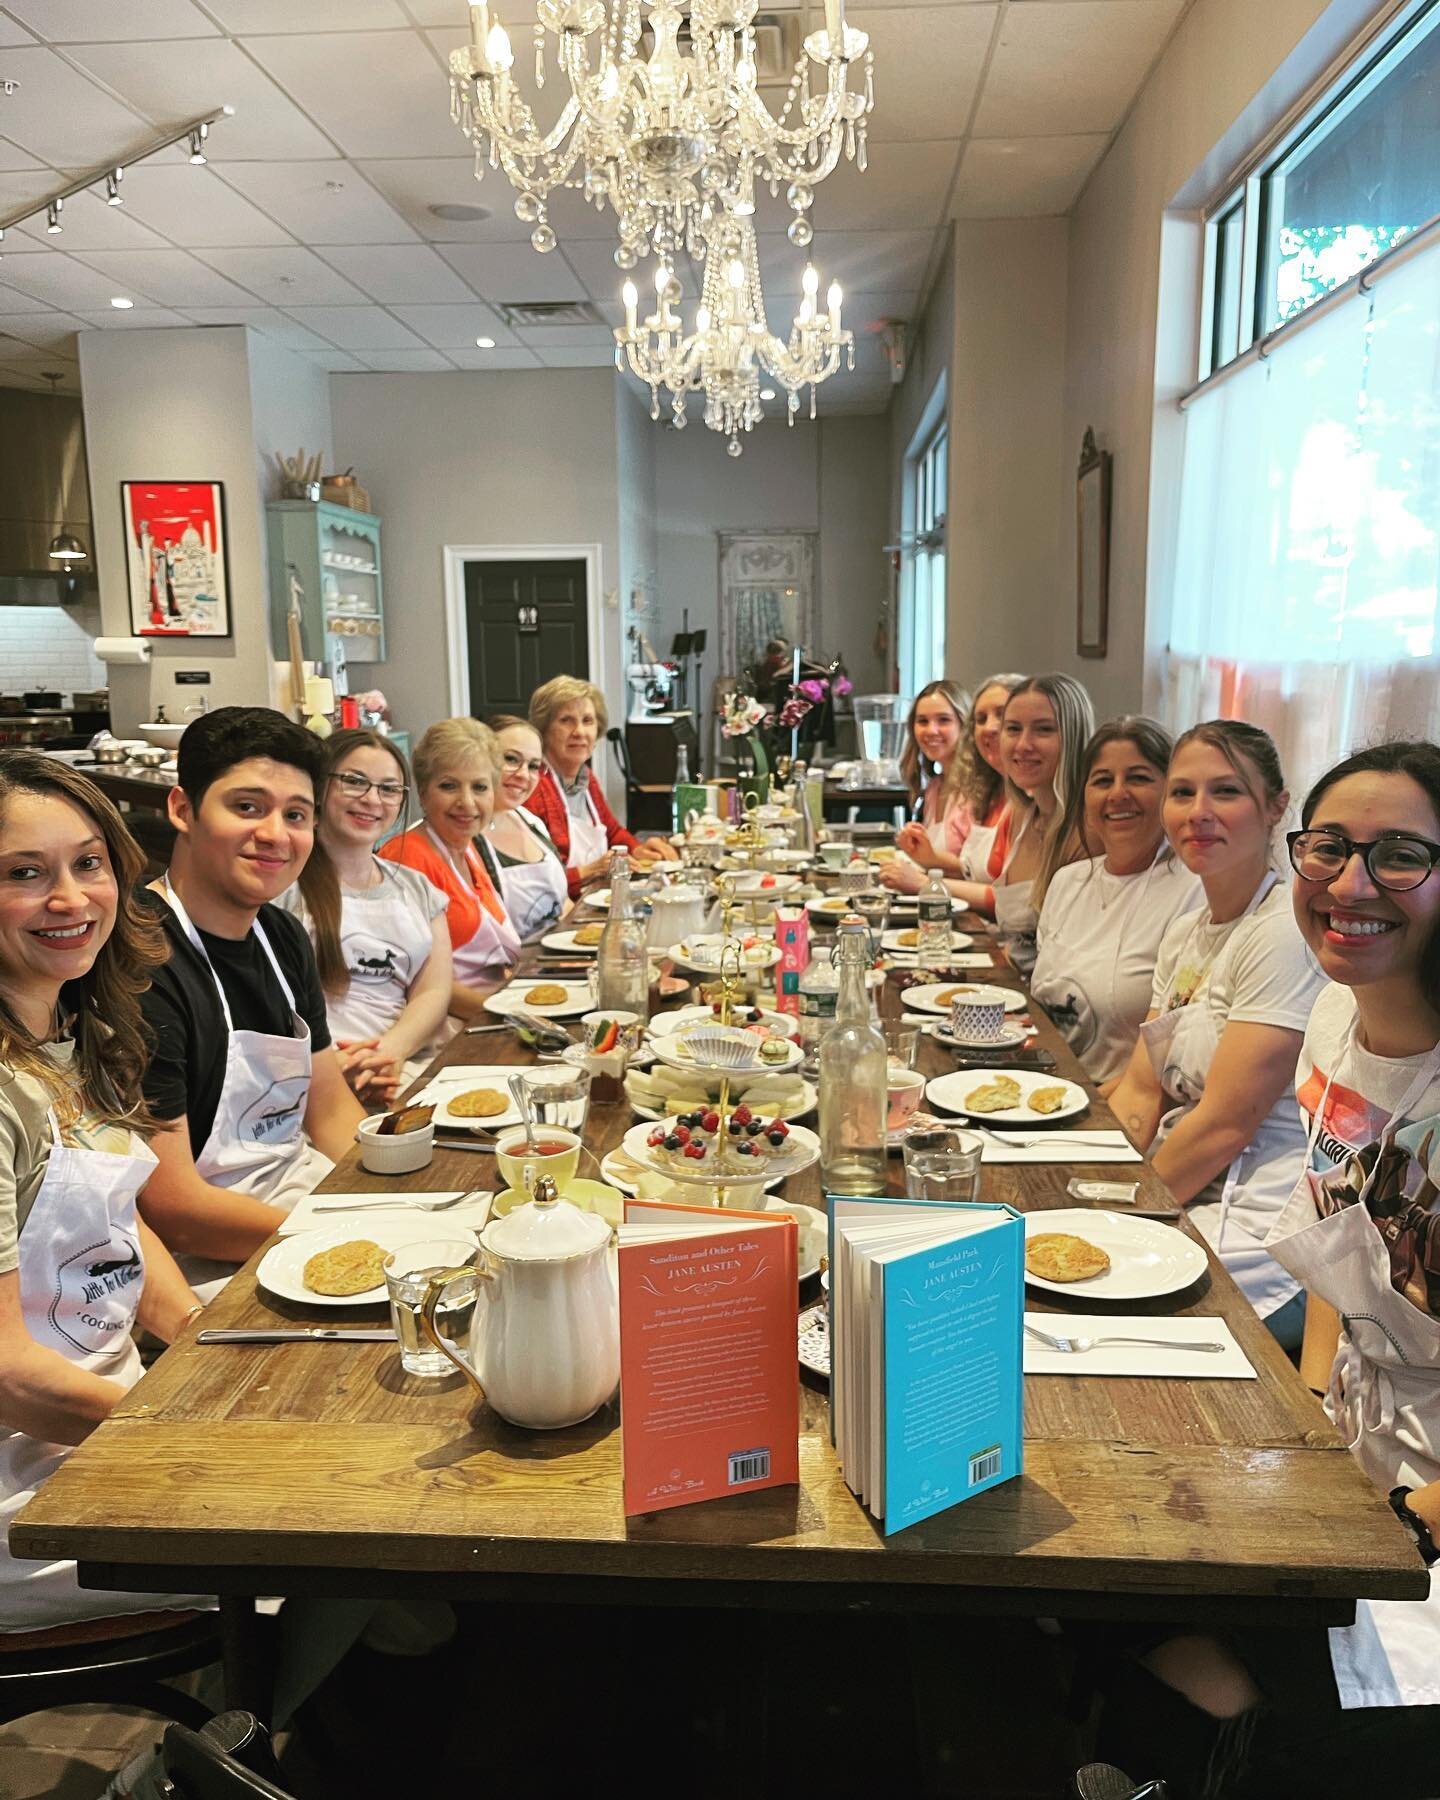 Always such a pleasure to have everyone gathered at the table with smiles. Today we celebrated Mother&rsquo;s Day with a special tea class , we made scones, assembled mini fruit tarts, chocolate souffl&eacute; and sat down to proper tea - double crea